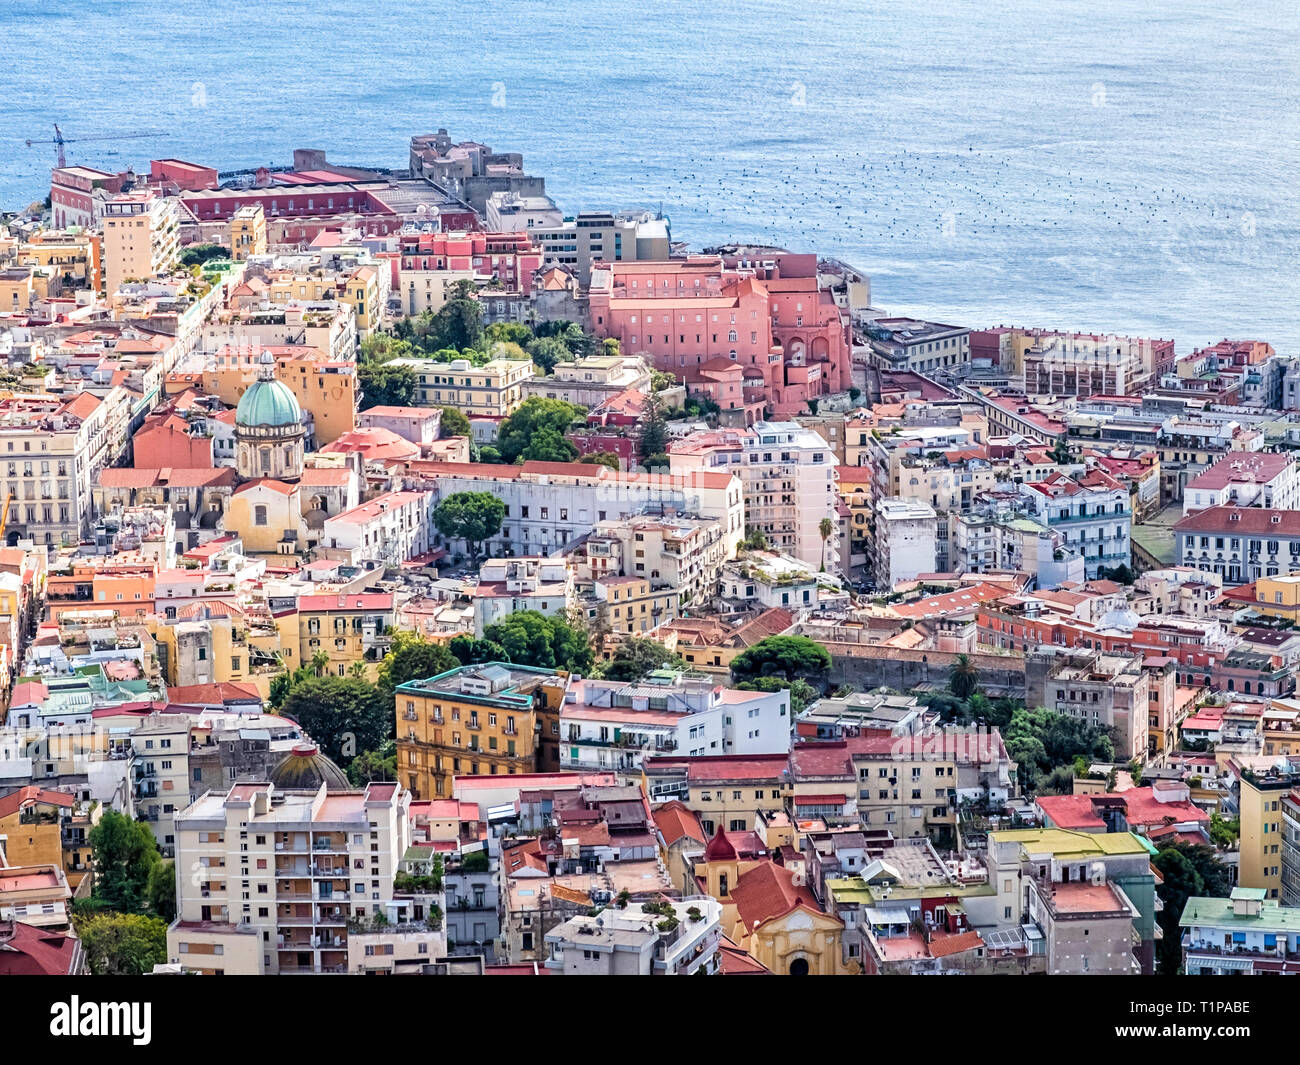 City Of Naples Viewed From Castle Saint Elmo Stock Photo